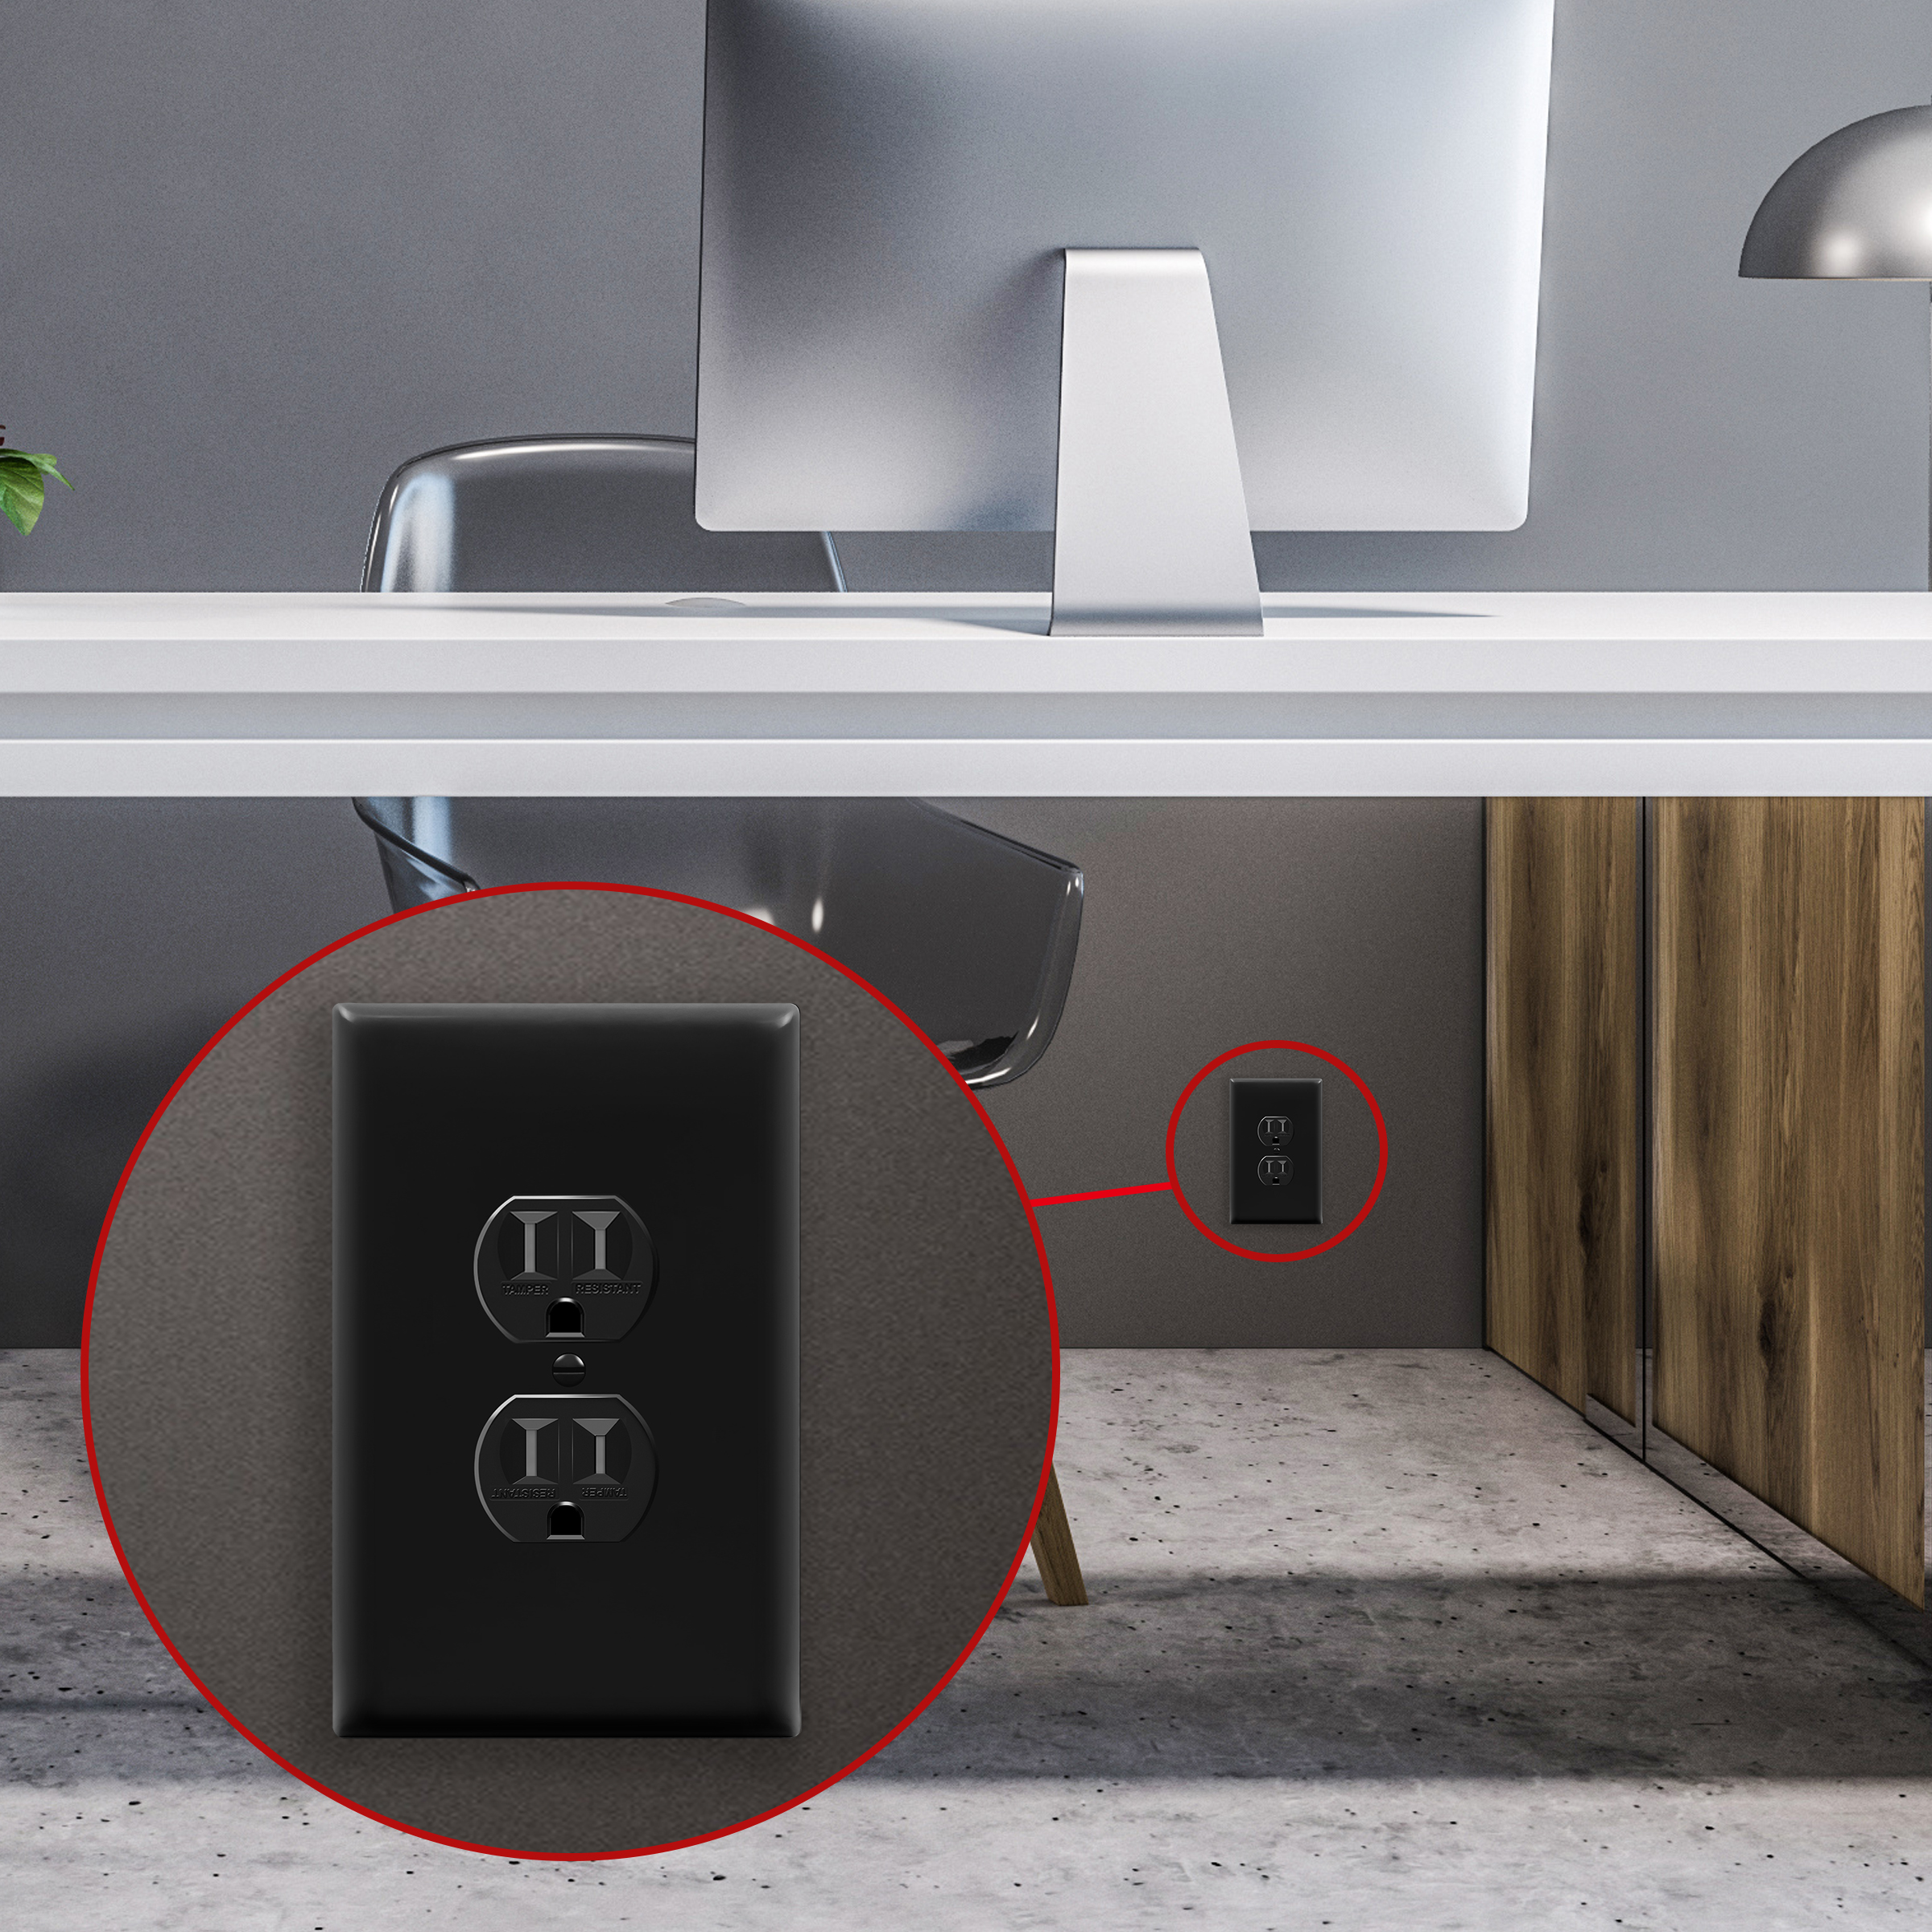 ENERLITES Duplex Receptacle Wall Plate, Jumbo Electrical Outlet Cover, Gloss Finish, Oversized 1-Gang, Polycarbonate Thermoplastic, Black - image 2 of 5